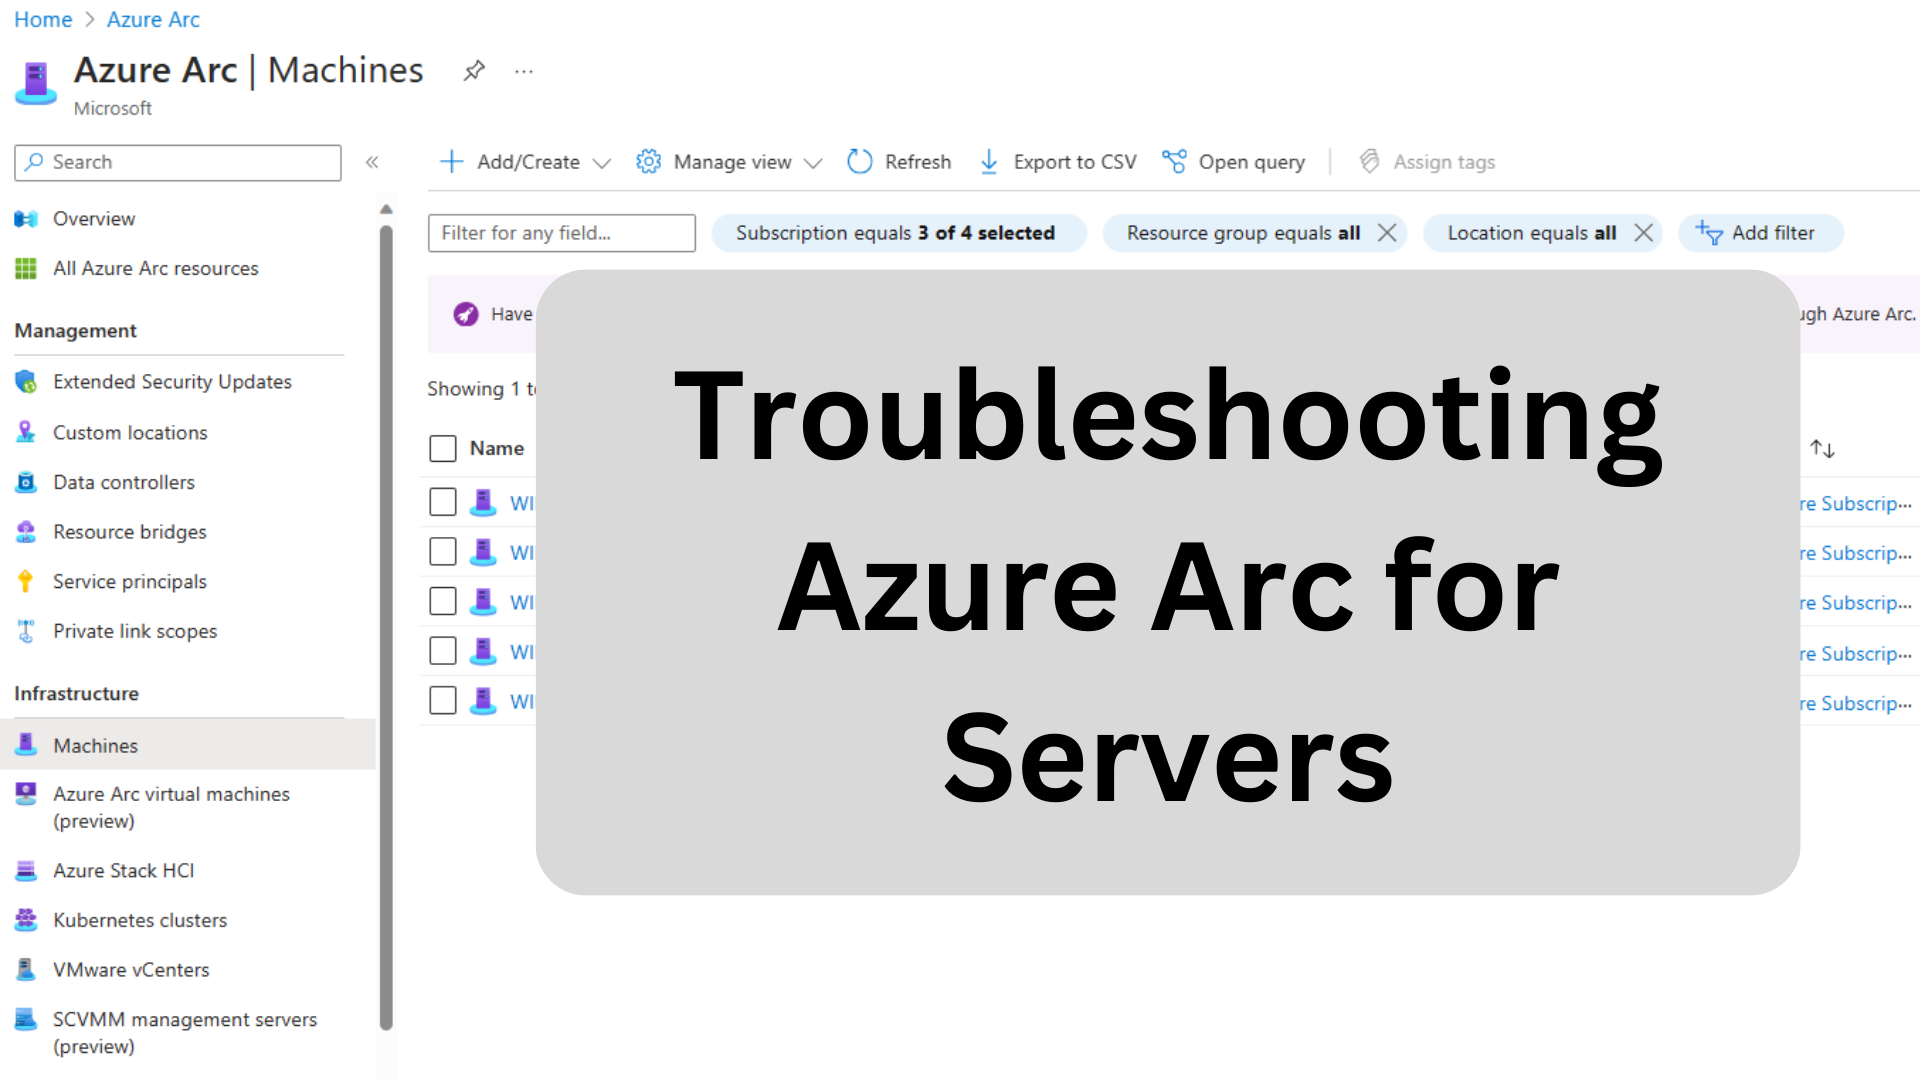 Troubleshooting Azure Arc for Servers